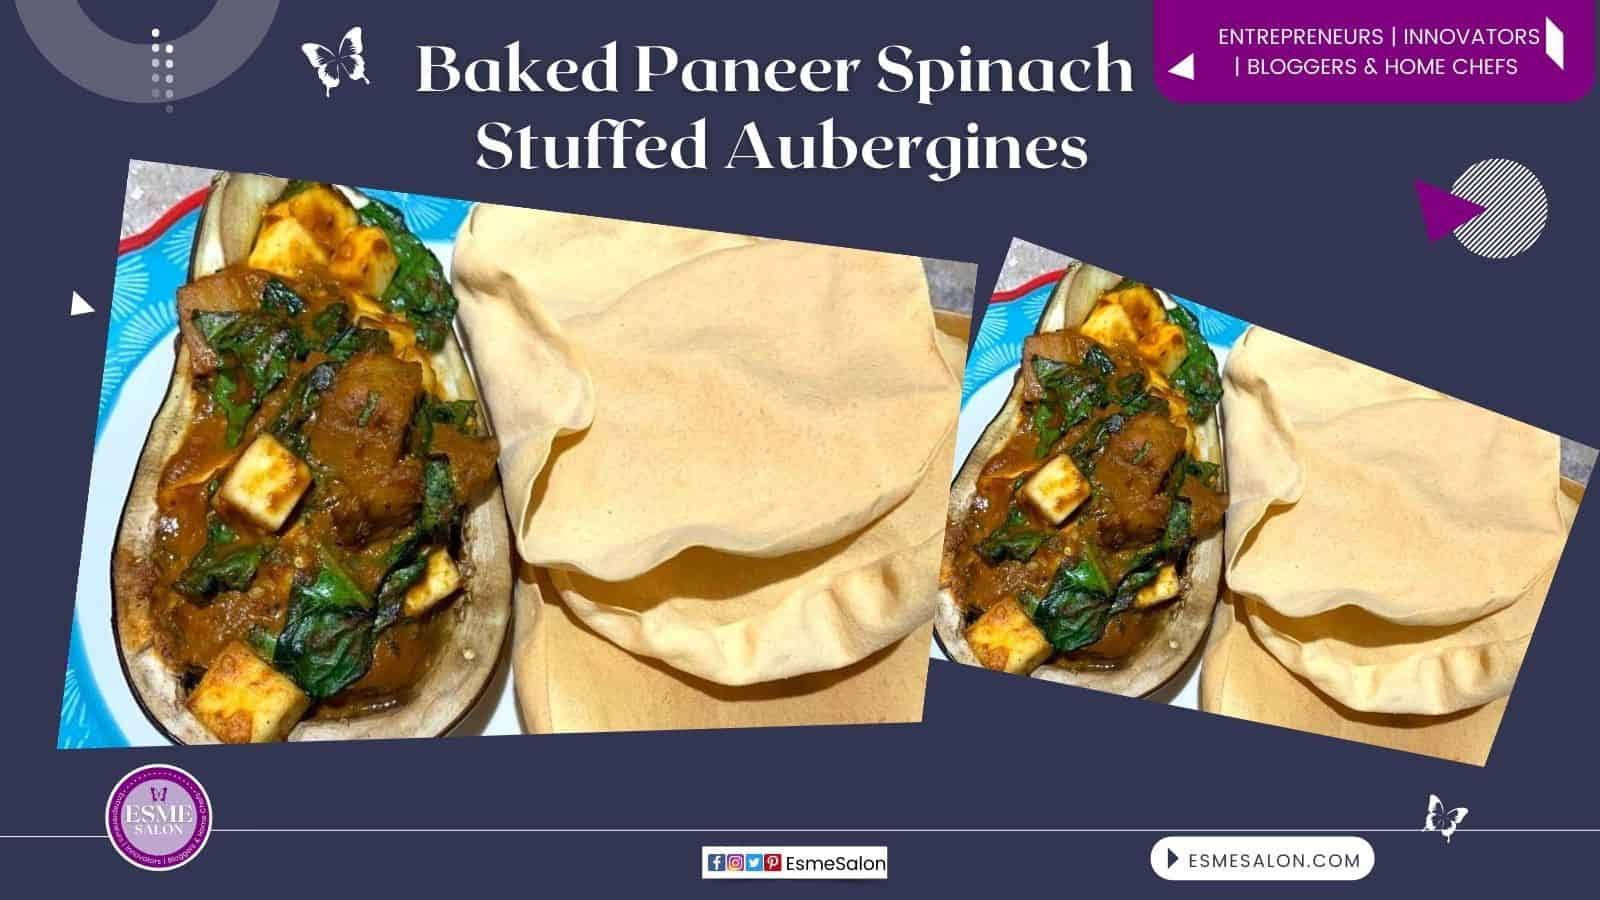 An image of Baked Paneer and a Spinach Stuffed Aubergine next to a papadam